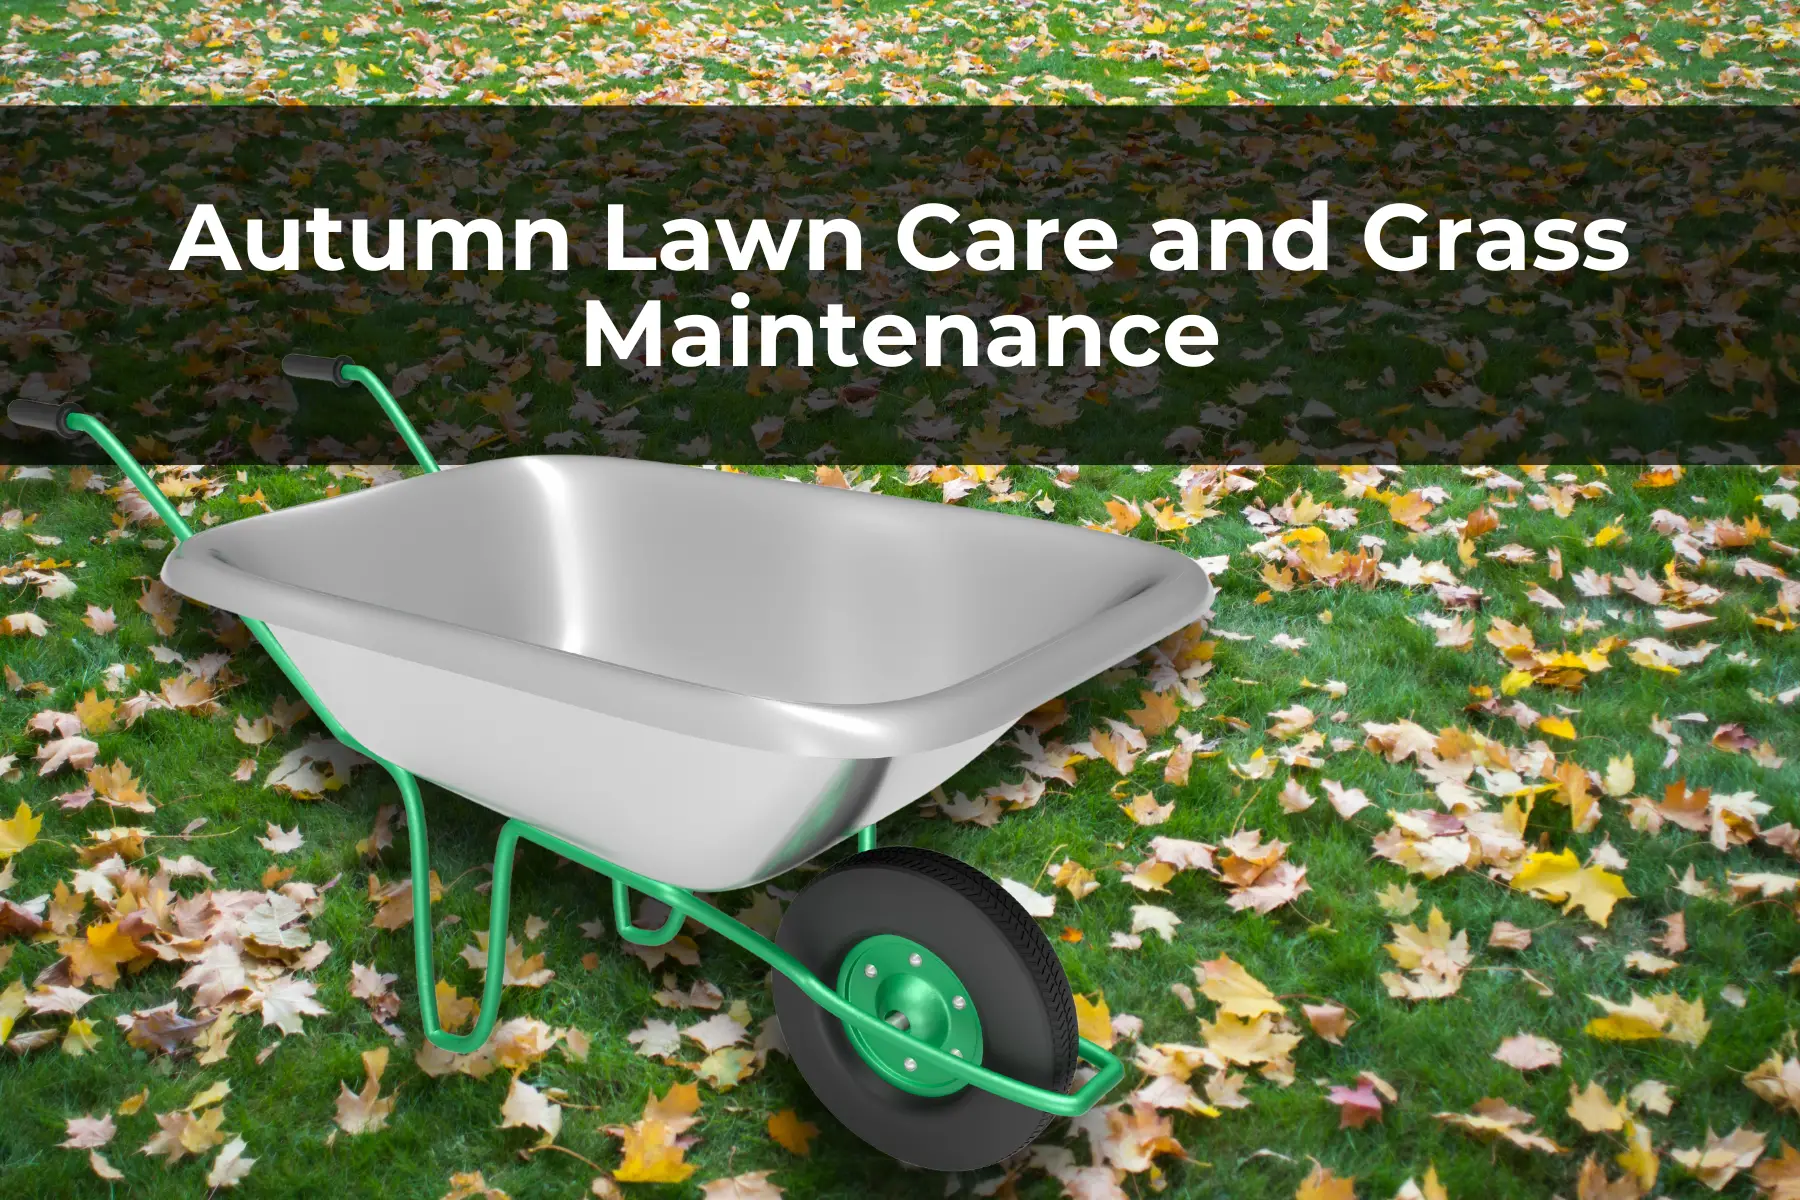 Autumn Lawn Care and Grass Maintenance